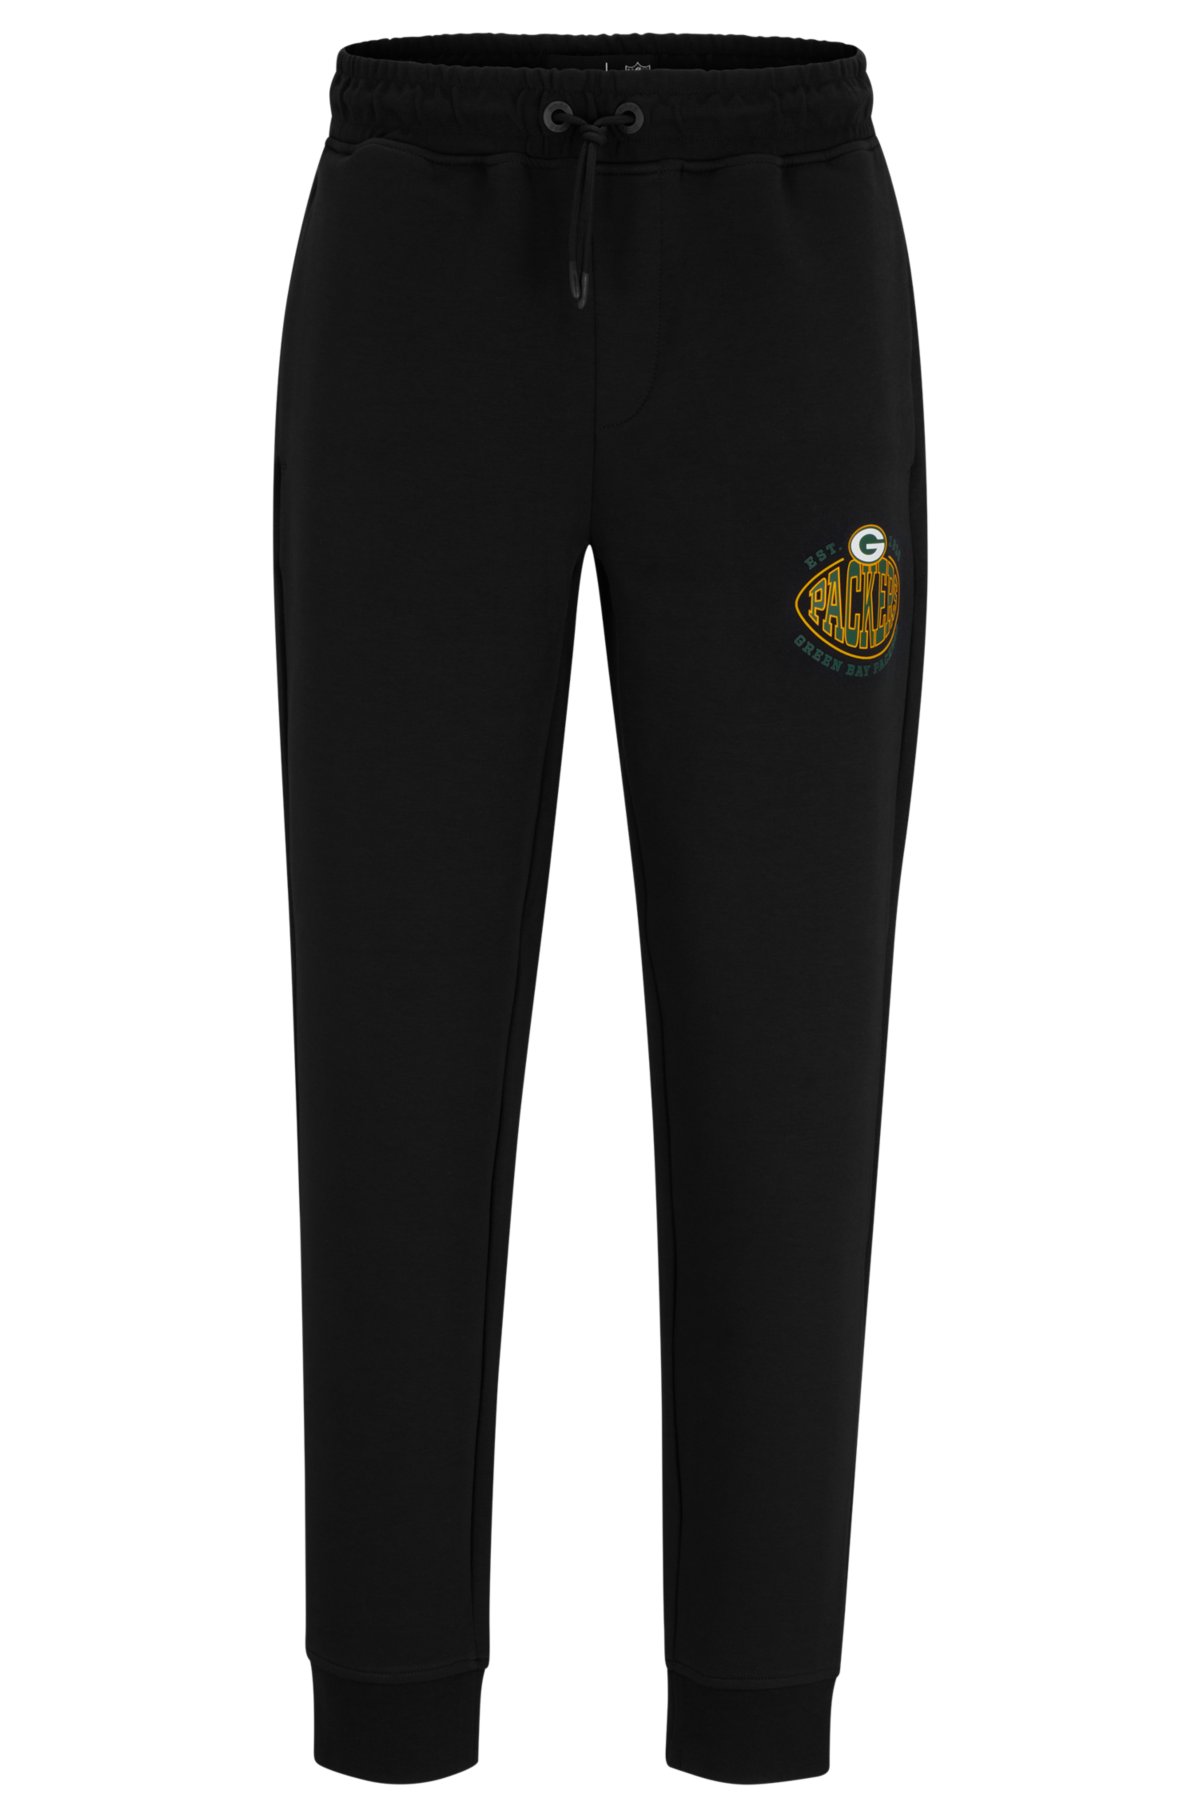 BOSS x NFL cotton-blend tracksuit bottoms with collaborative branding, Packers